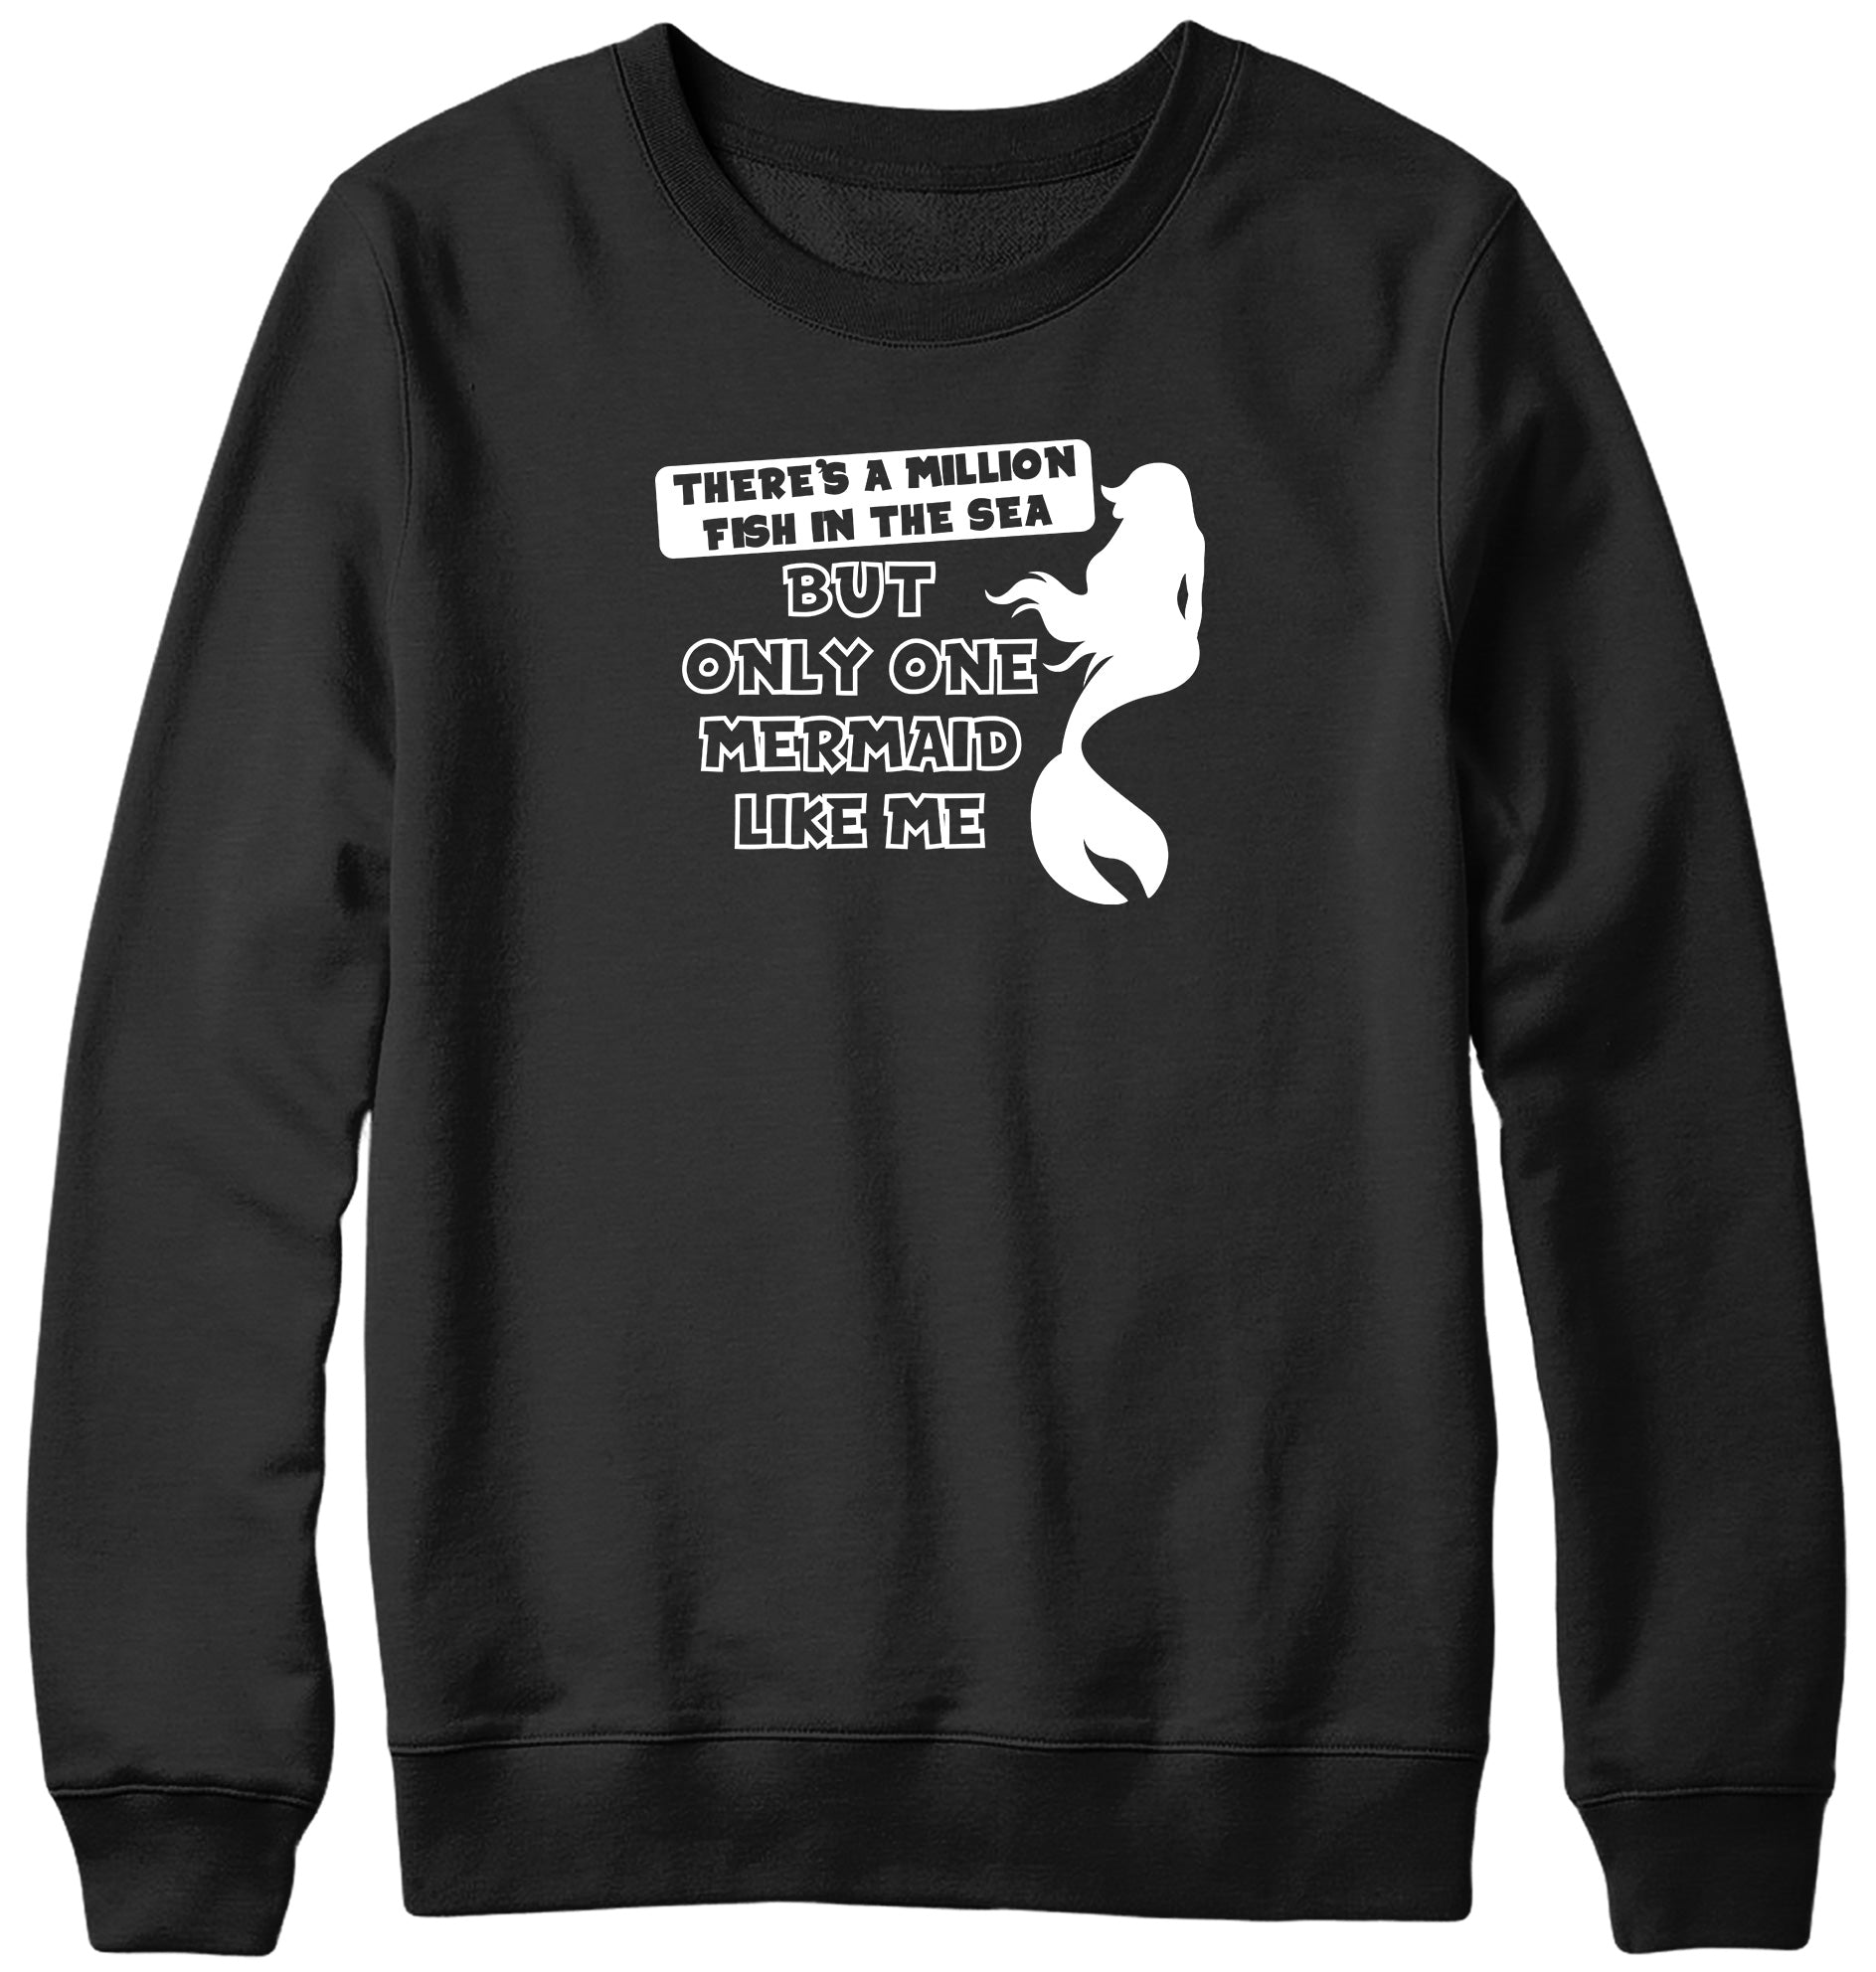 THERE'S A MILLION FISH IN THE SEA BUT ONLY ONE MERMAID LIKE ME MENS LADIES WOMENS UNISEX SWEATSHIRT SWEATER